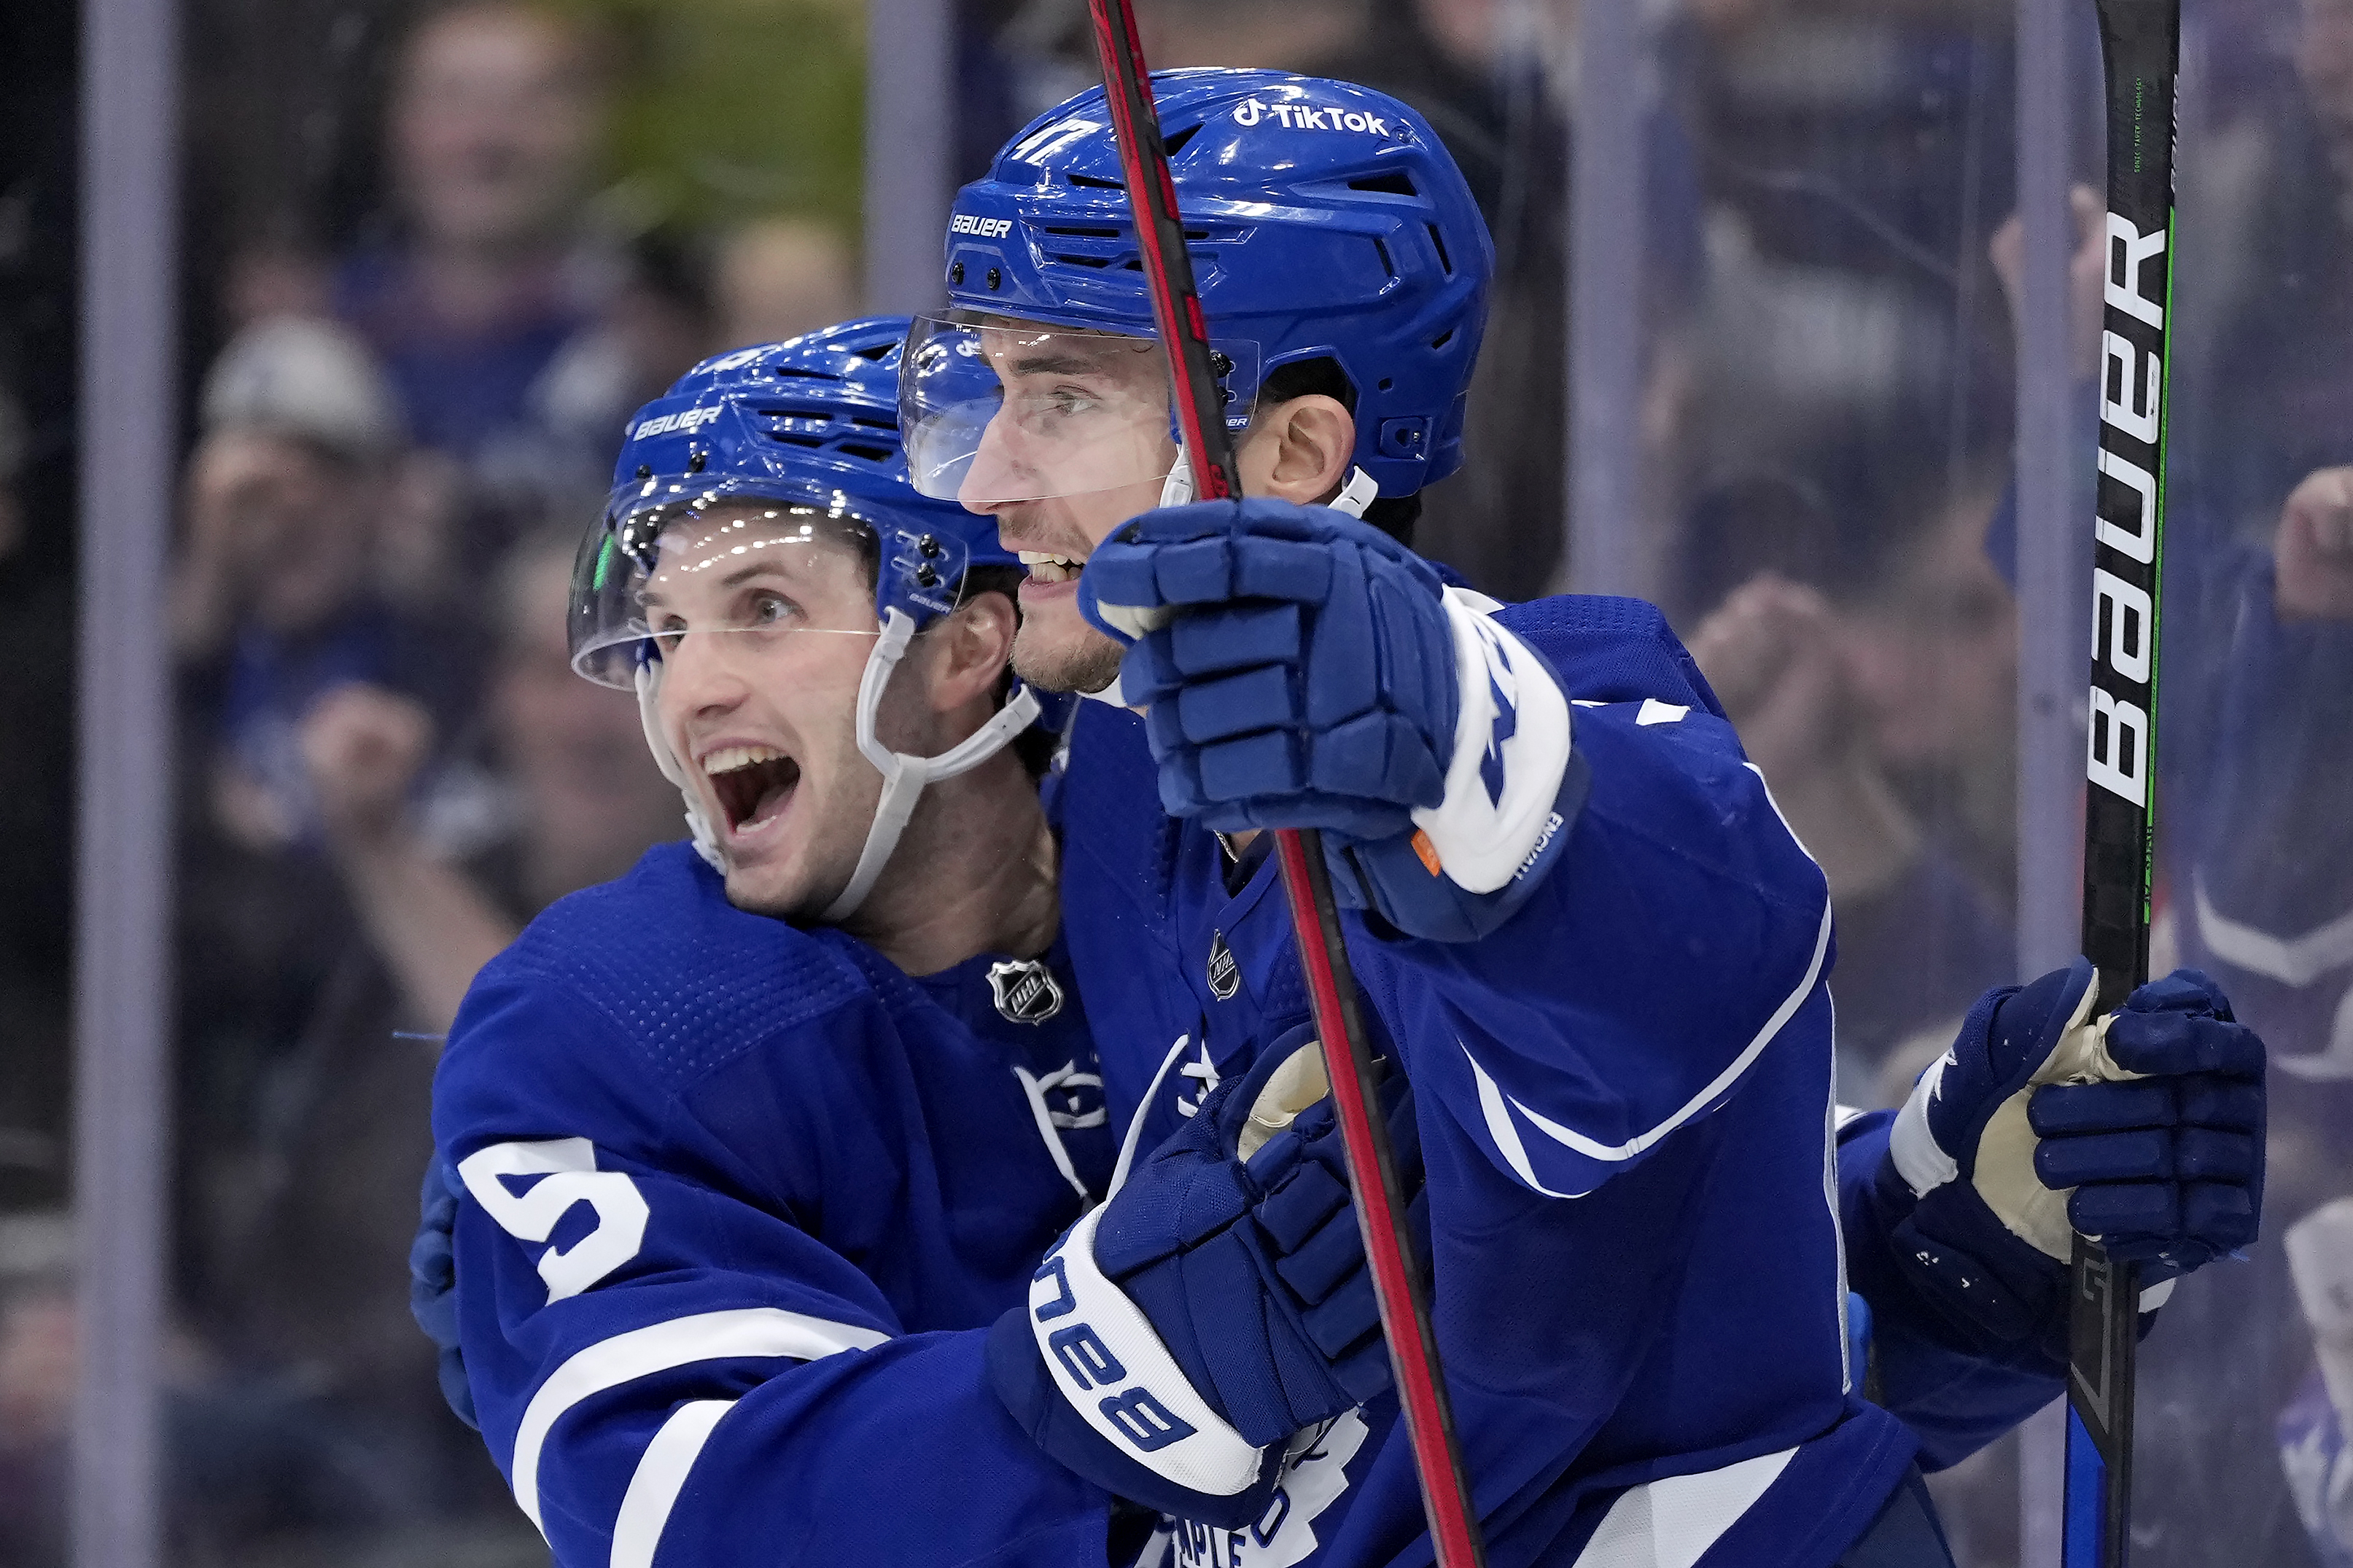 Maple Leafs beat Isles 4-2, break team wins and points marks